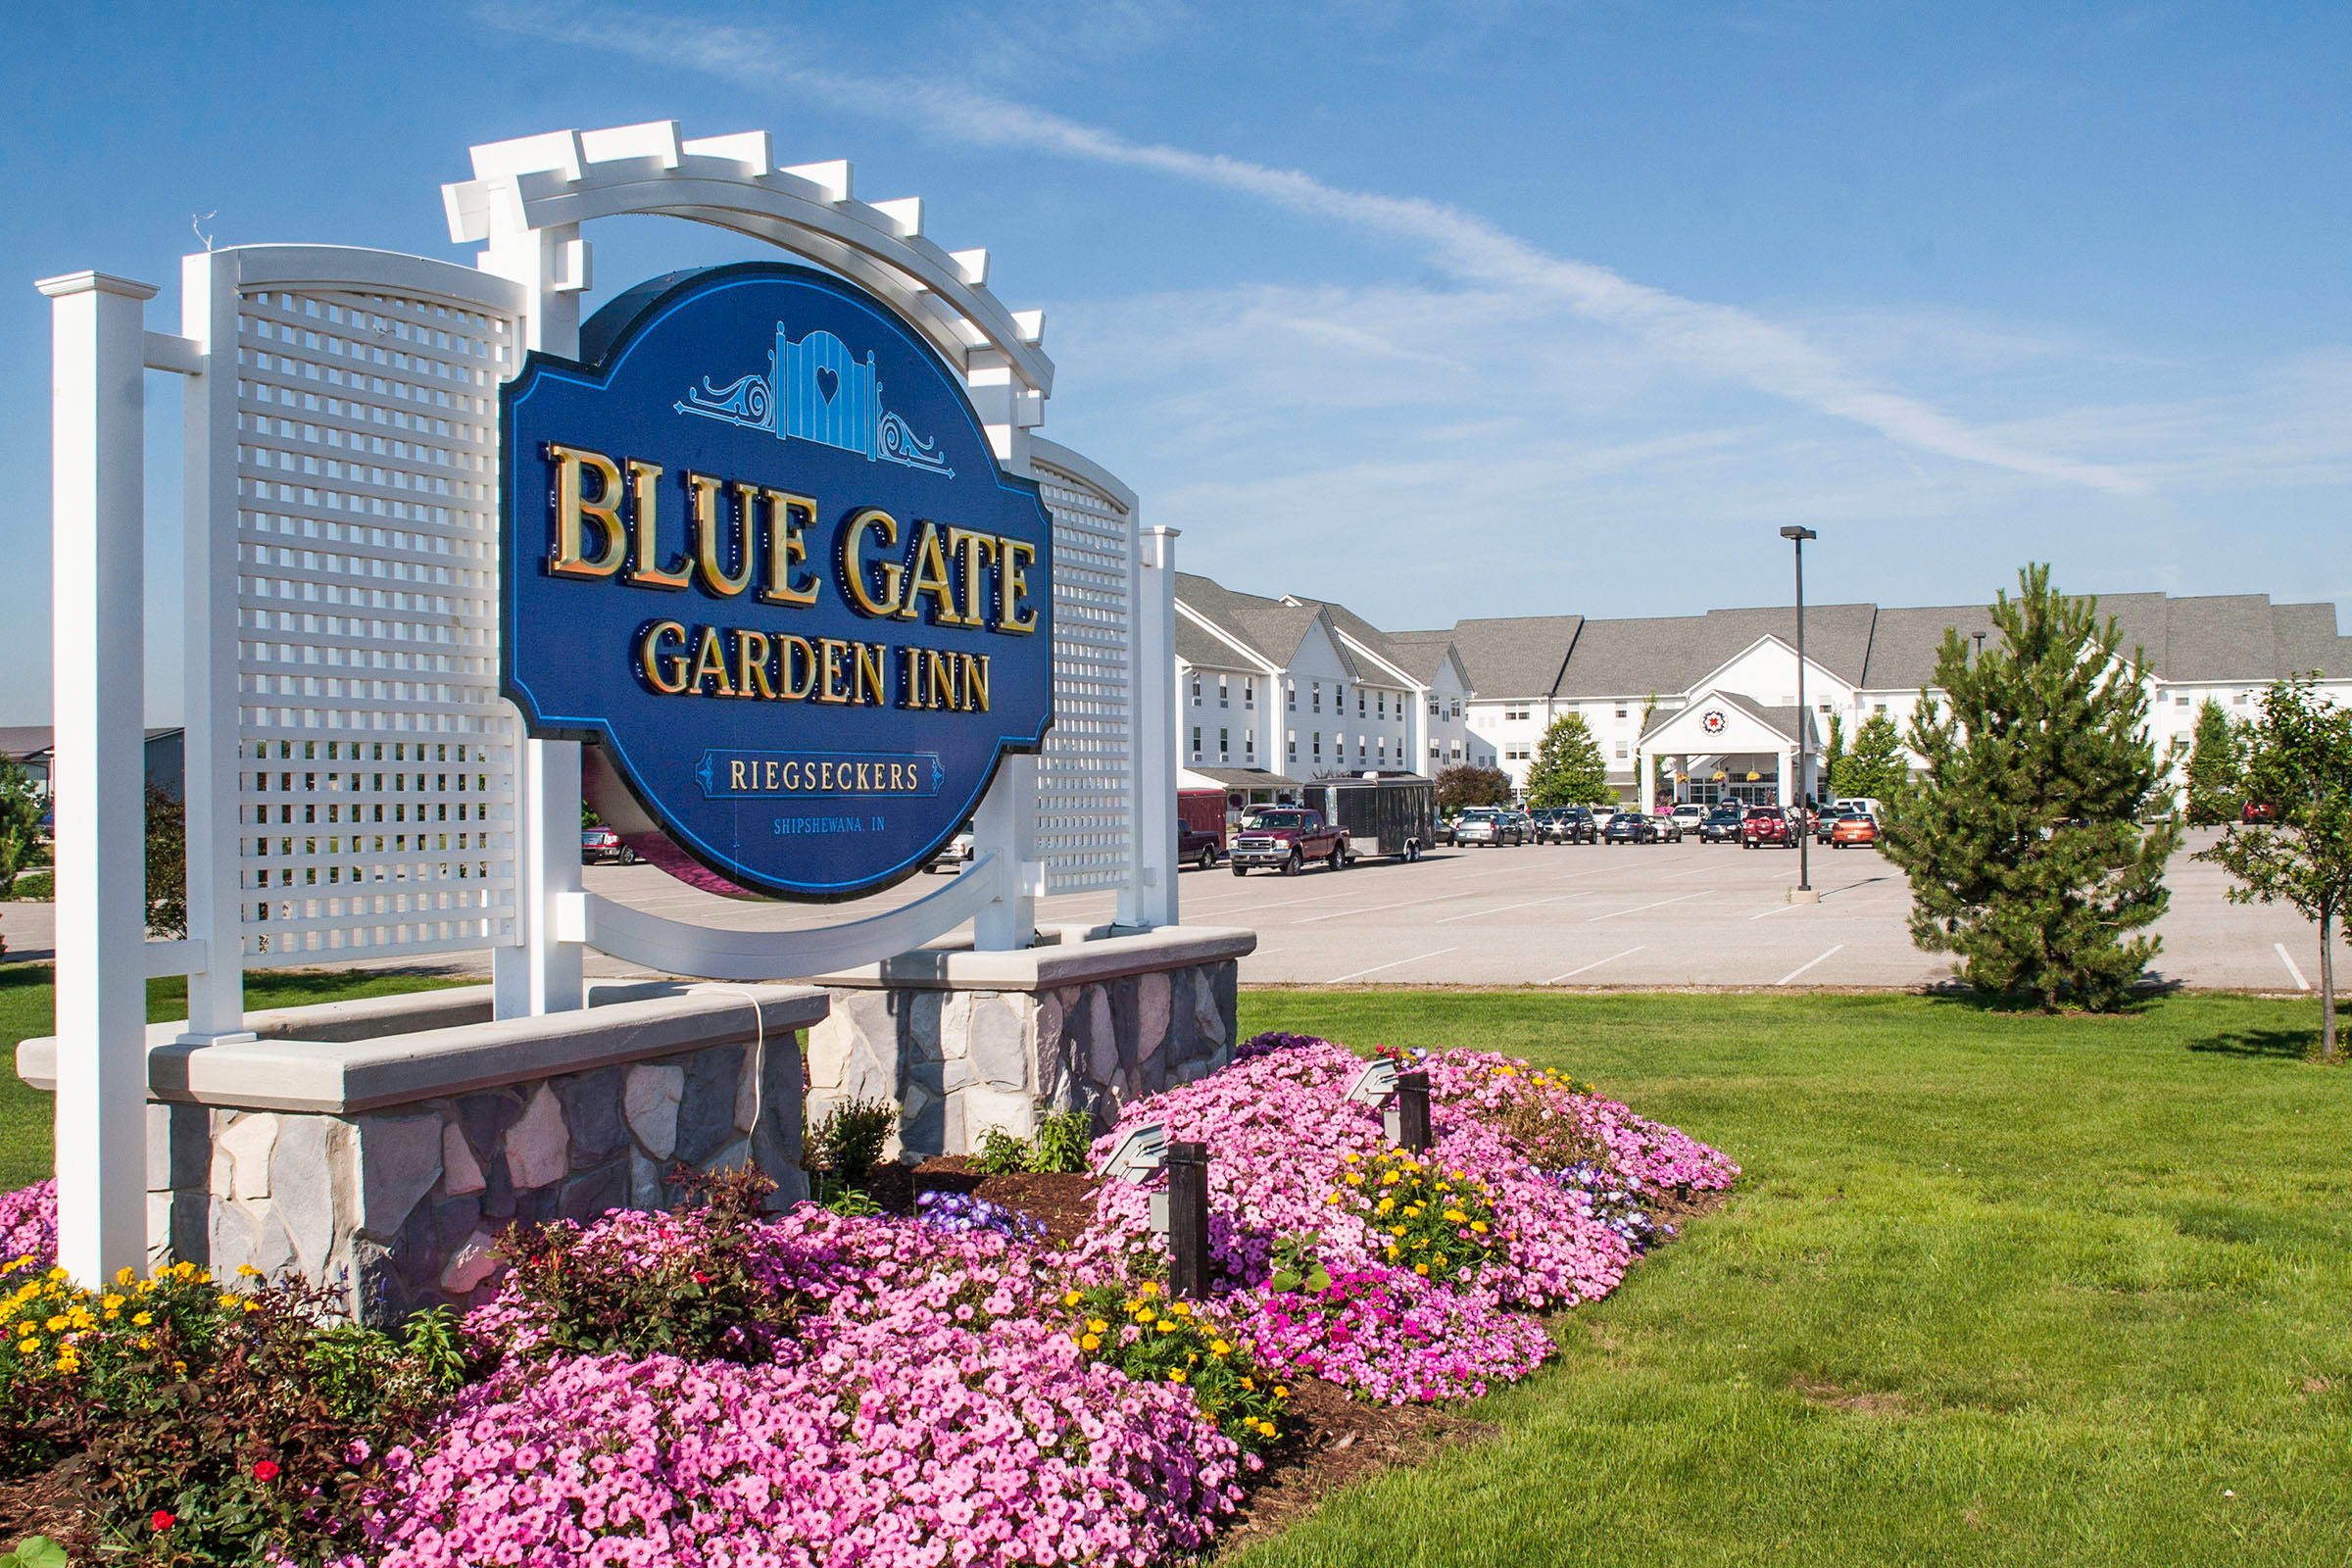 Best Hotel in Amish Country: The Blue Gate Garden Inn